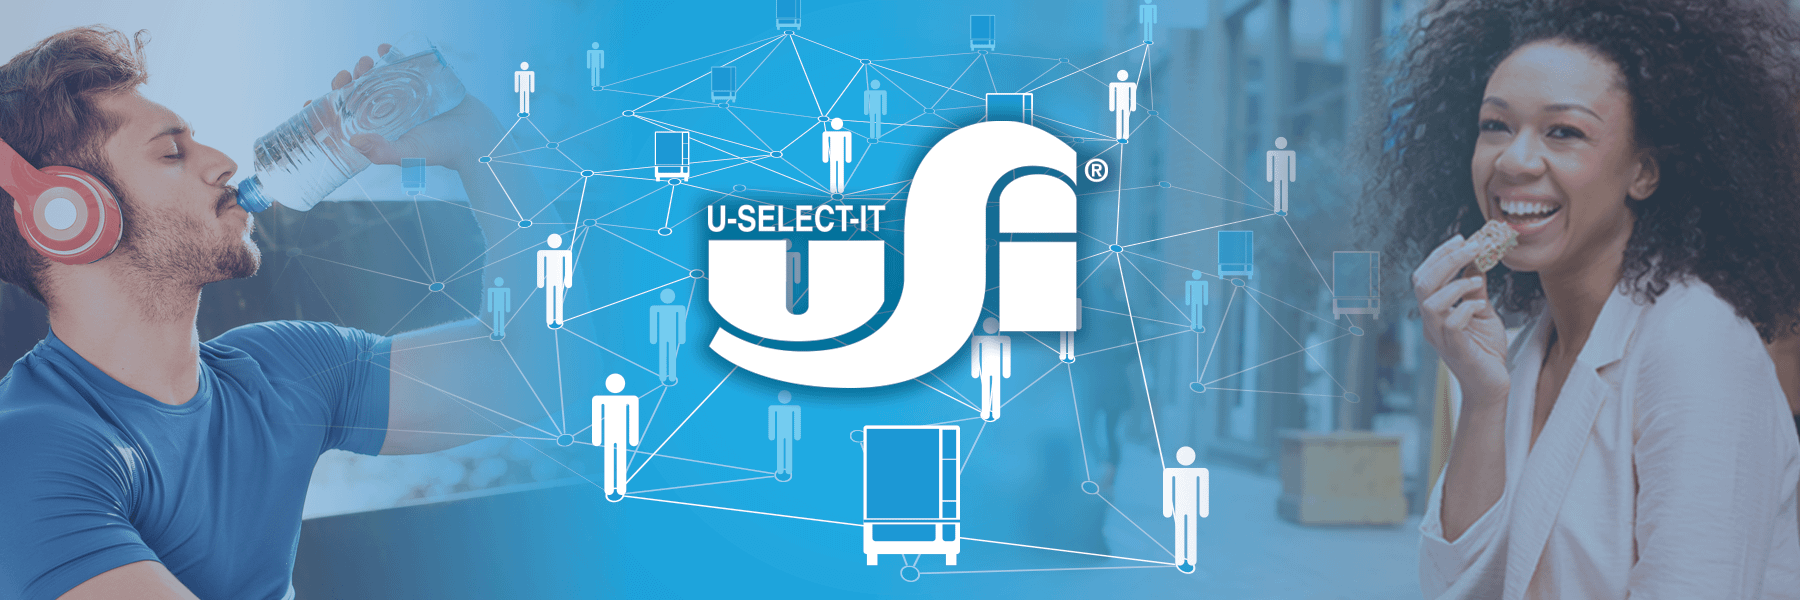 U-Select-It's mission is to feed America’s workforce by connecting people with machines.